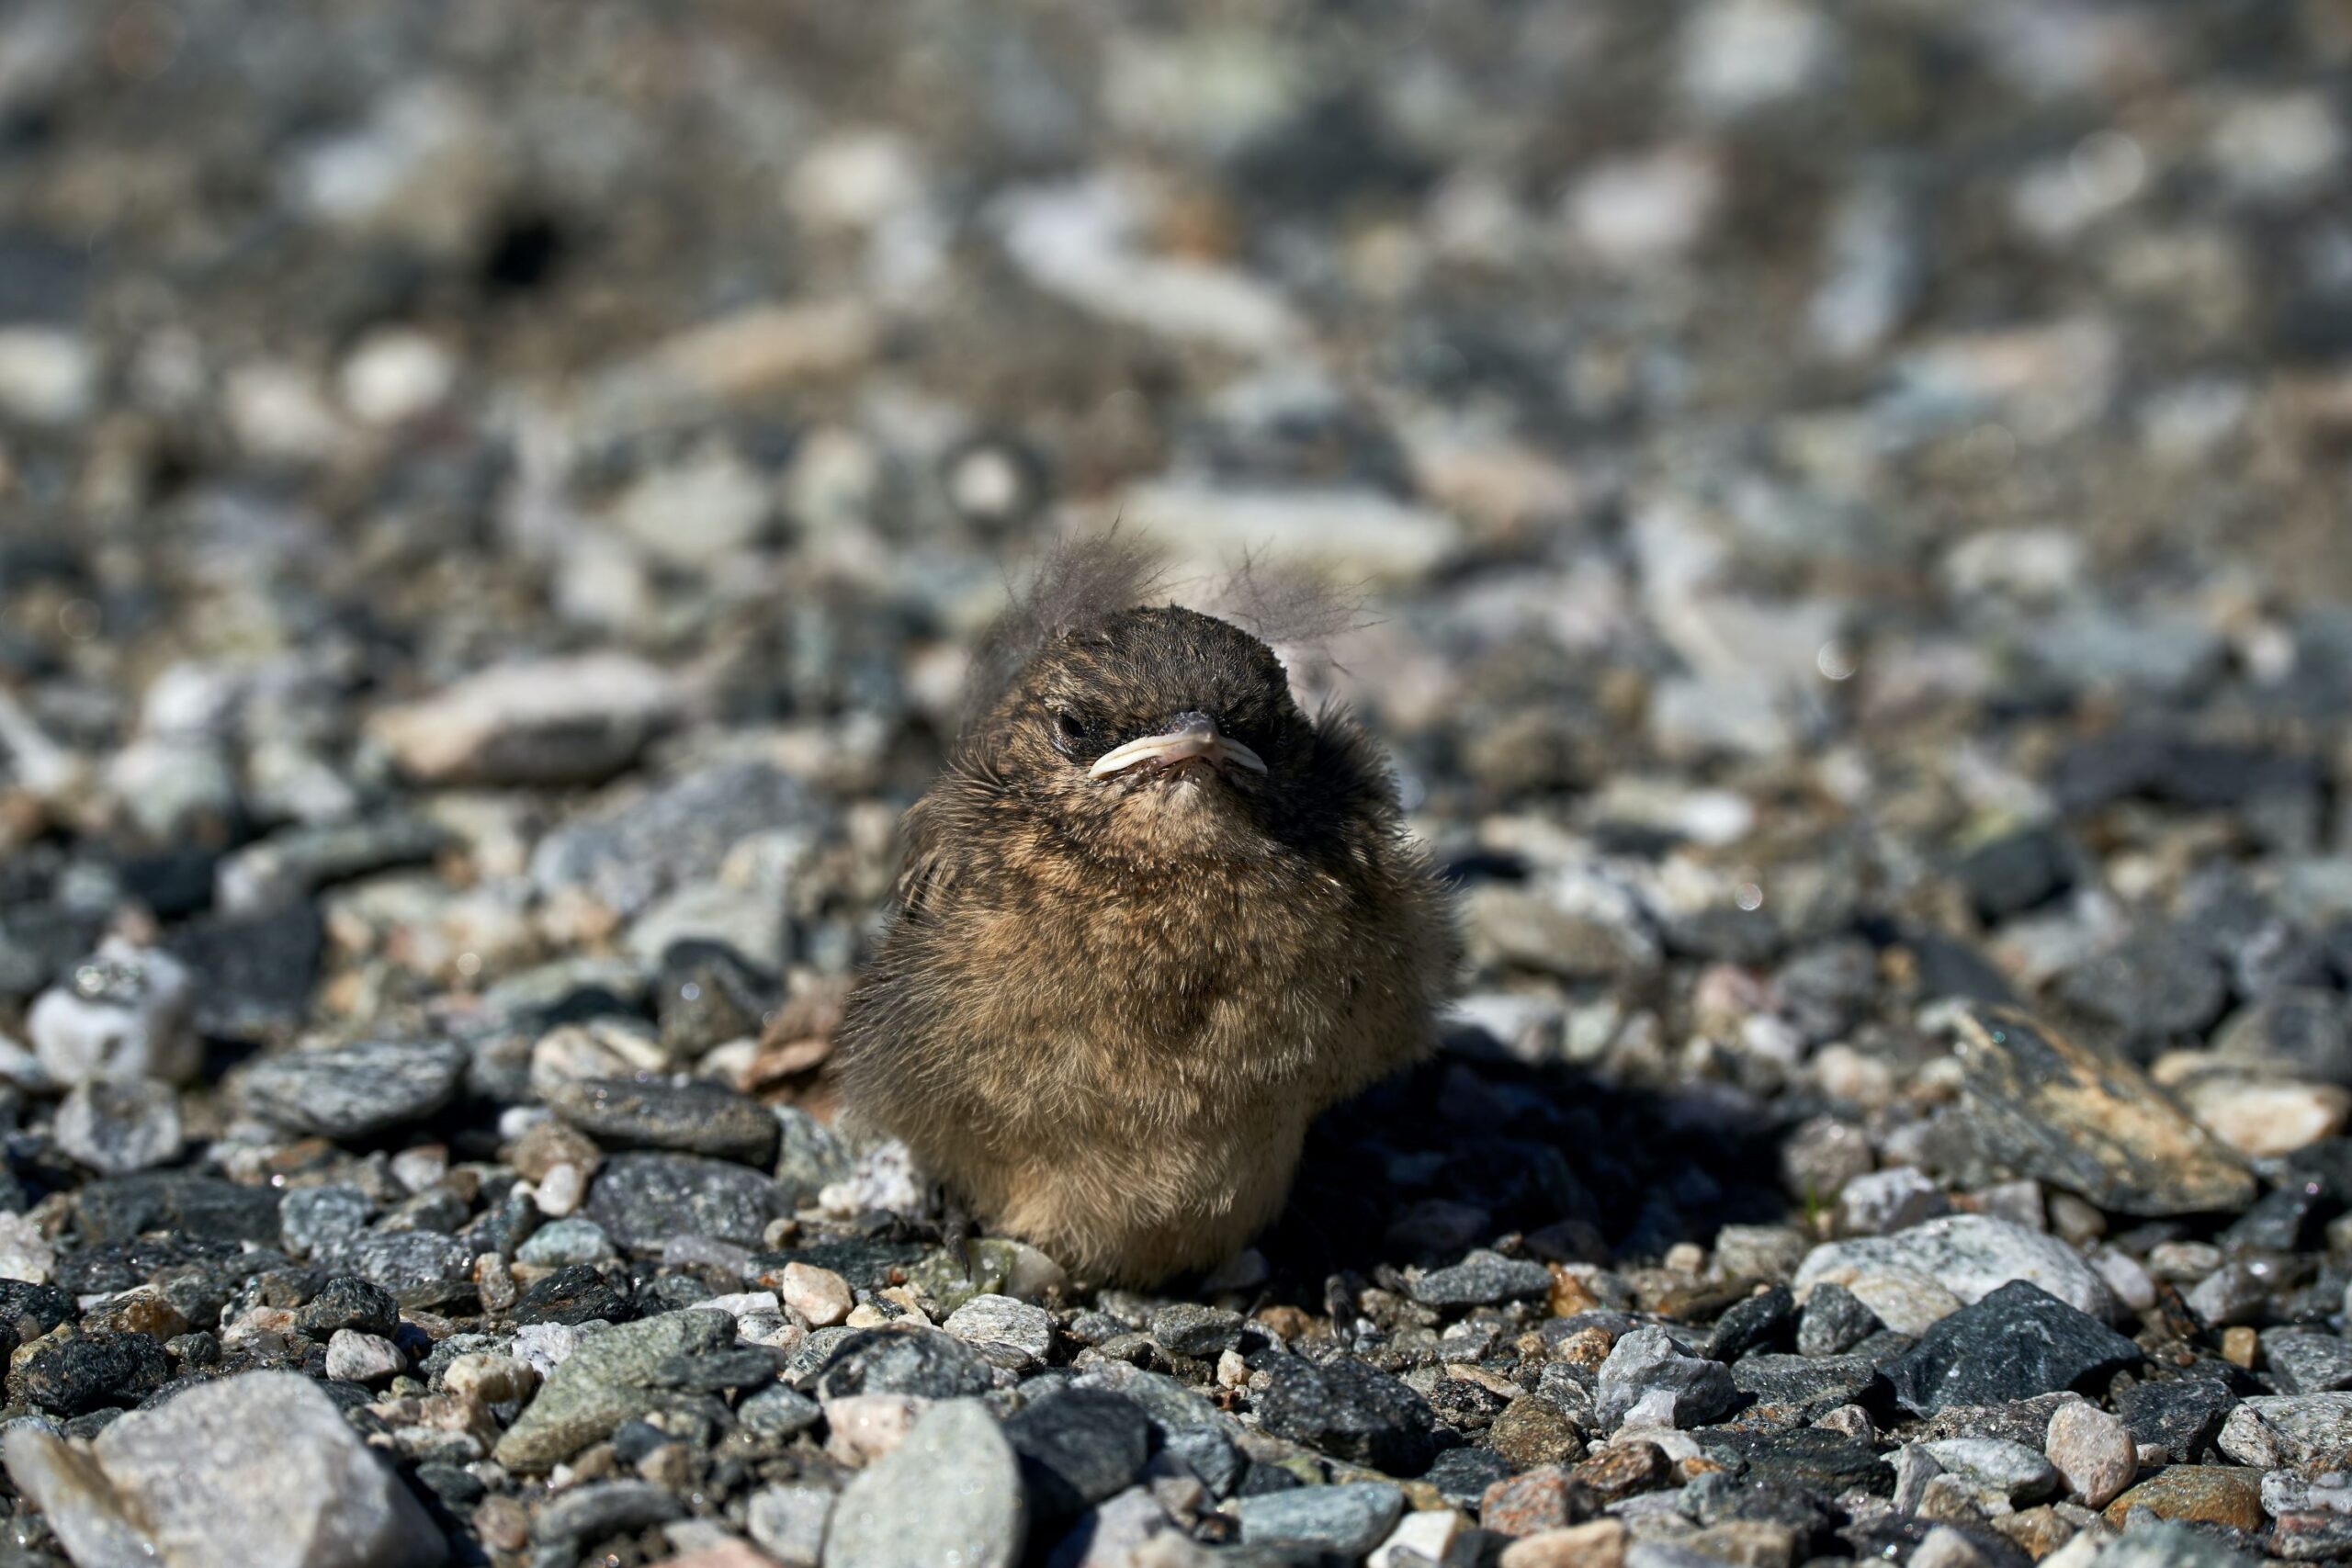 A fledgling bird on the ground.